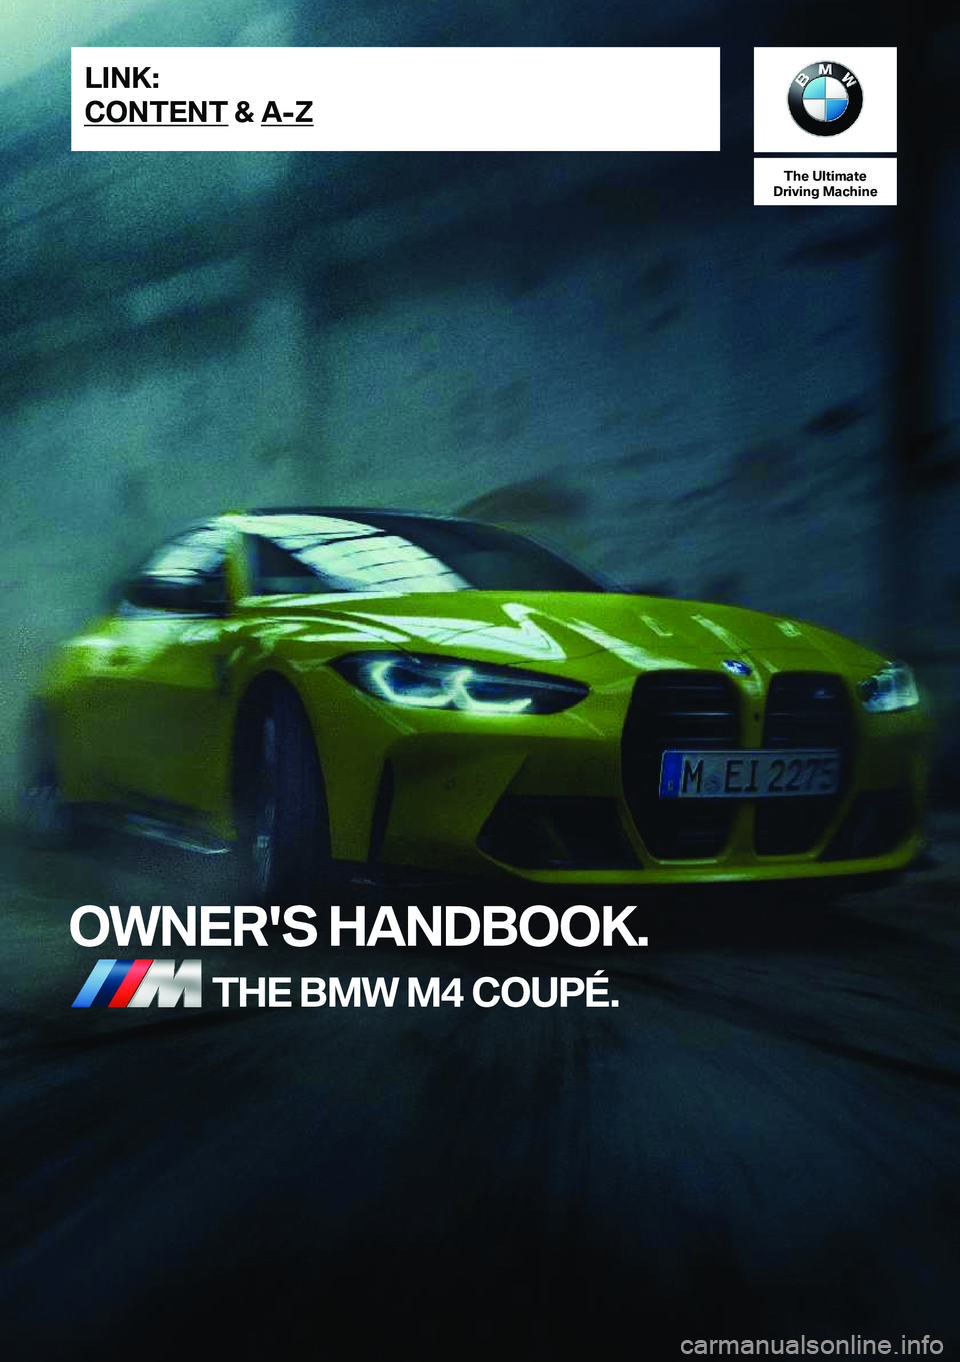 BMW M4 2021  Owners Manual �T�h�e��U�l�t�i�m�a�t�e
�D�r�i�v�i�n�g��M�a�c�h�i�n�e
�O�W�N�E�R�'�S��H�A�N�D�B�O�O�K�.�T�H�E��B�M�W��M�4��C�O�U�P�